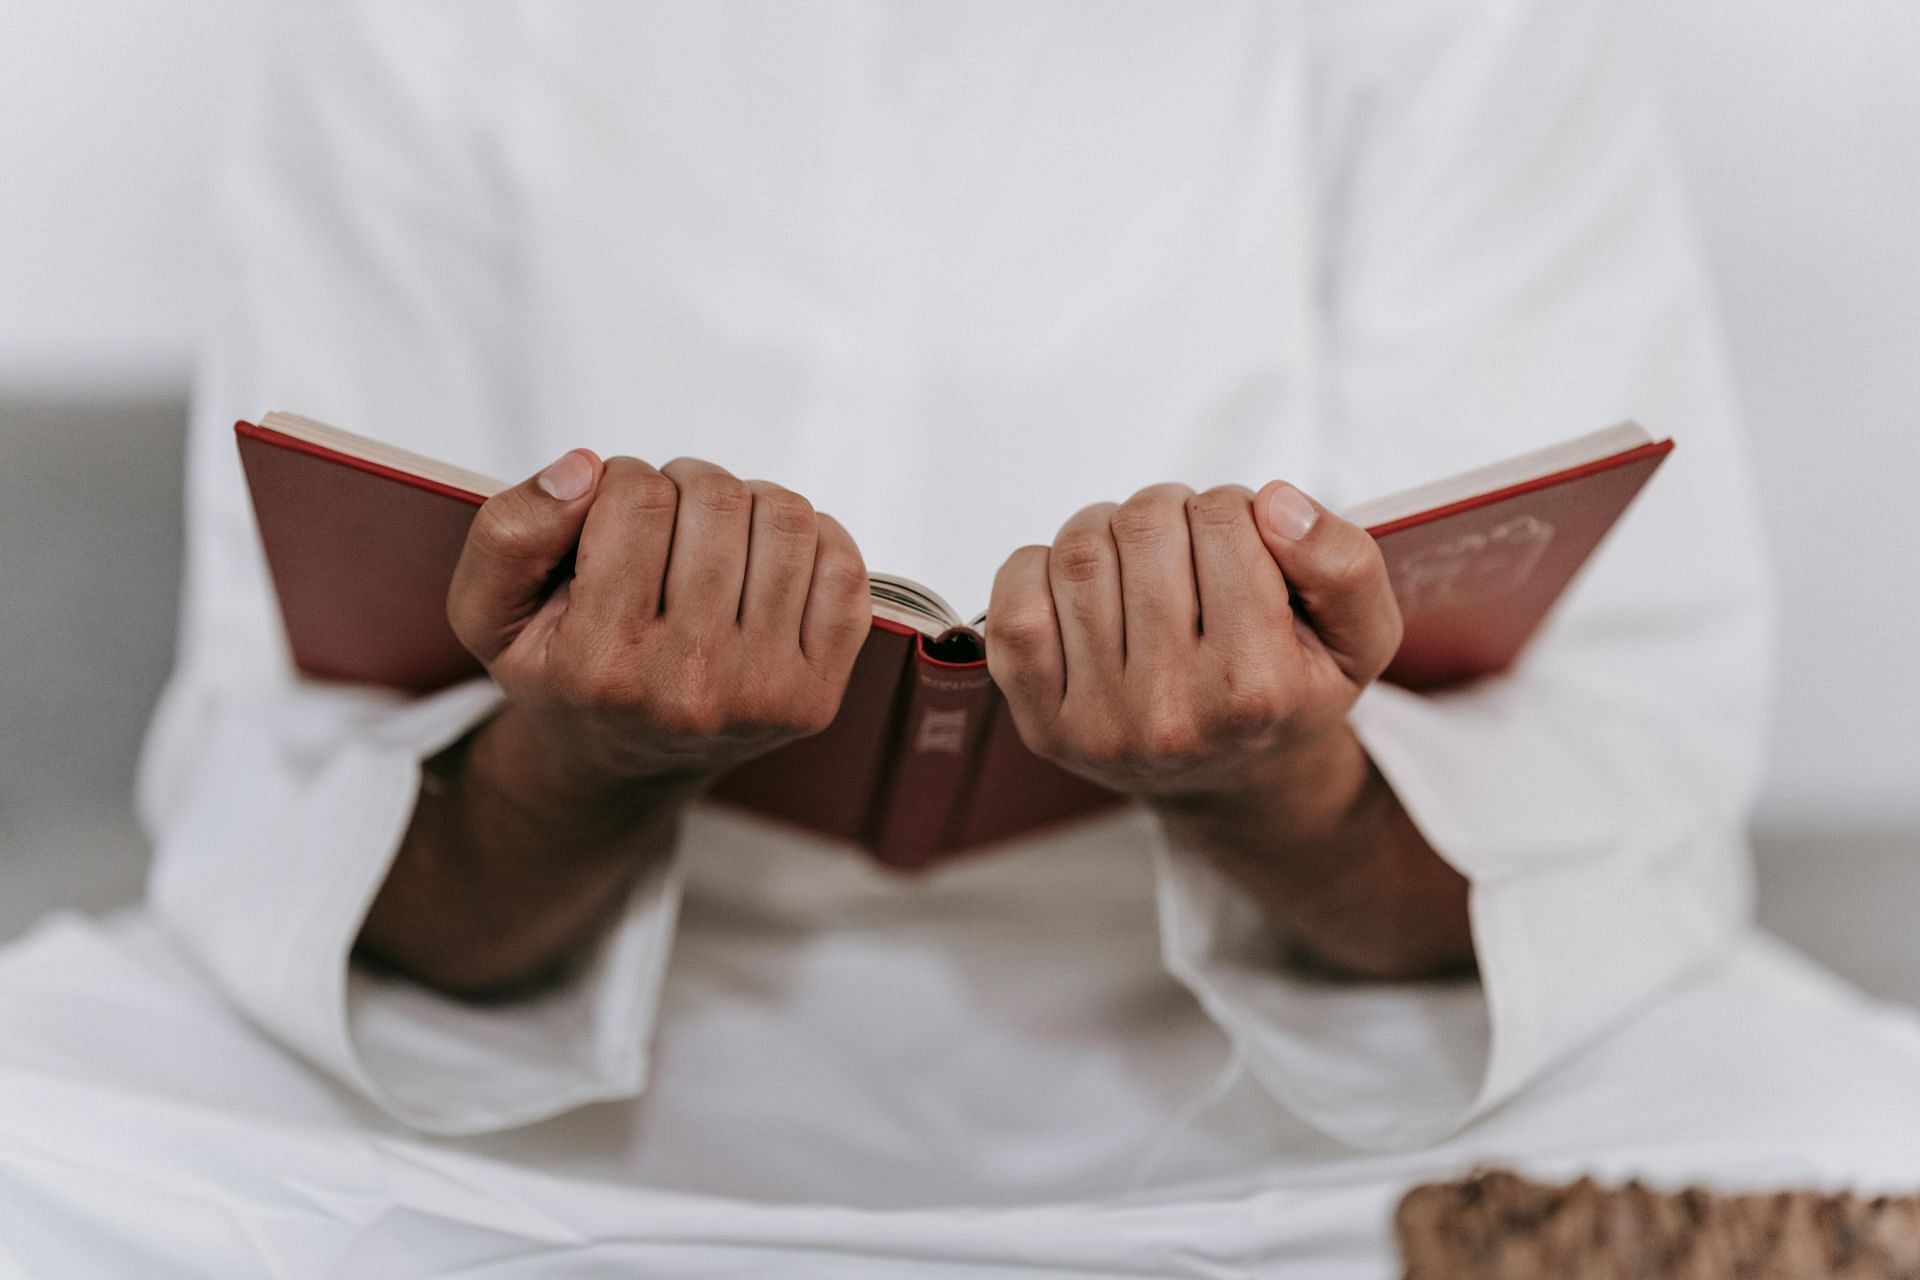 Benefits of fasting in Ramadan (image sourced via Pexels / Photo by michael)